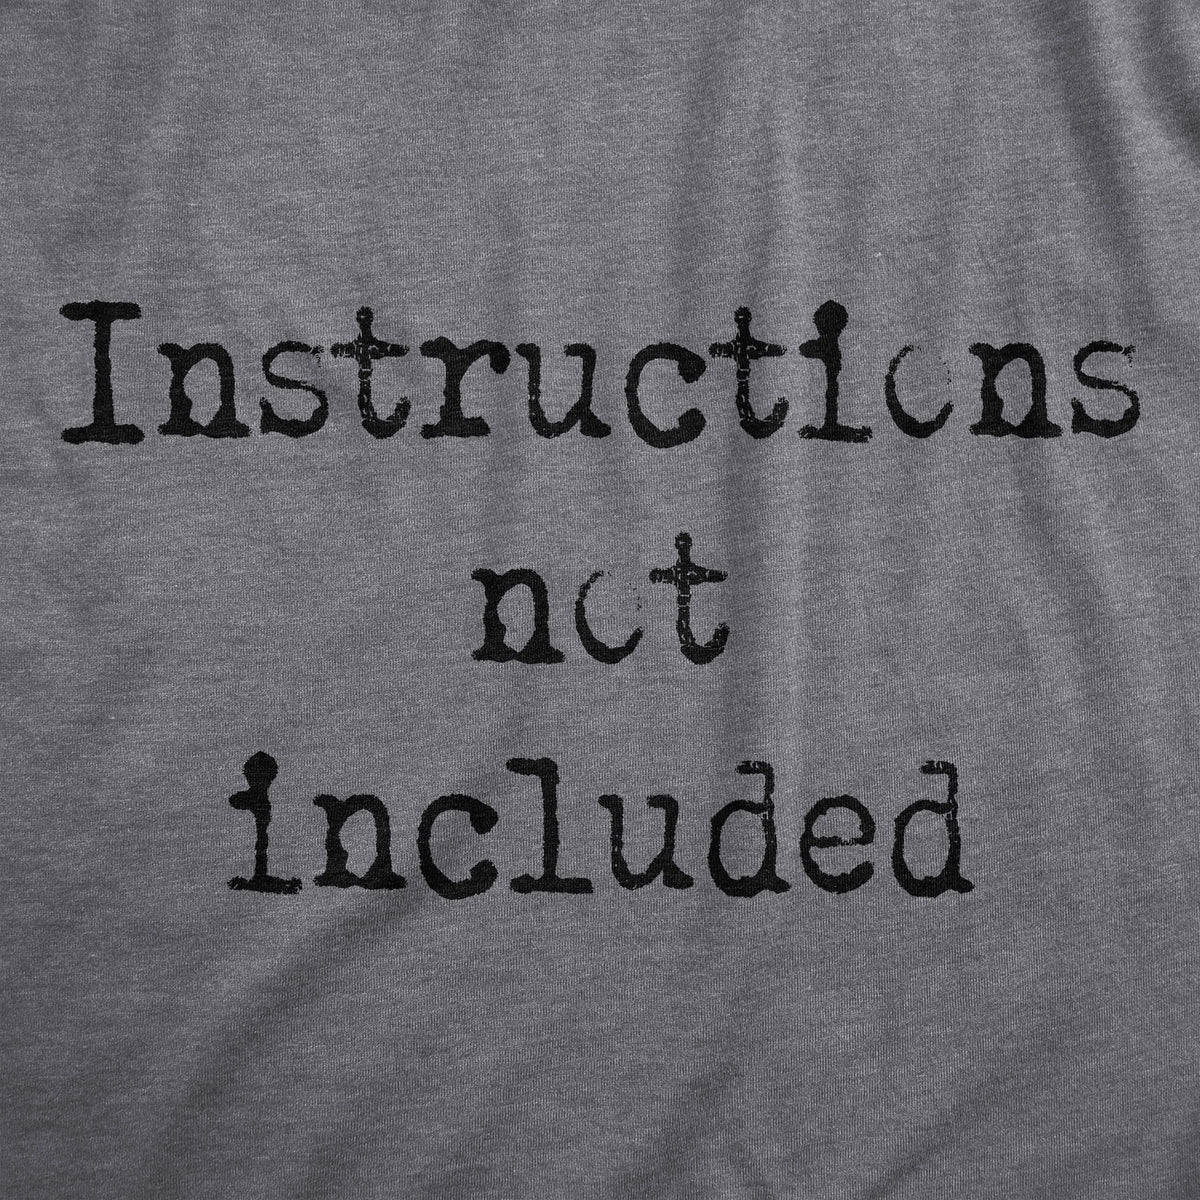 Instructions Not Included Baby Bodysuit